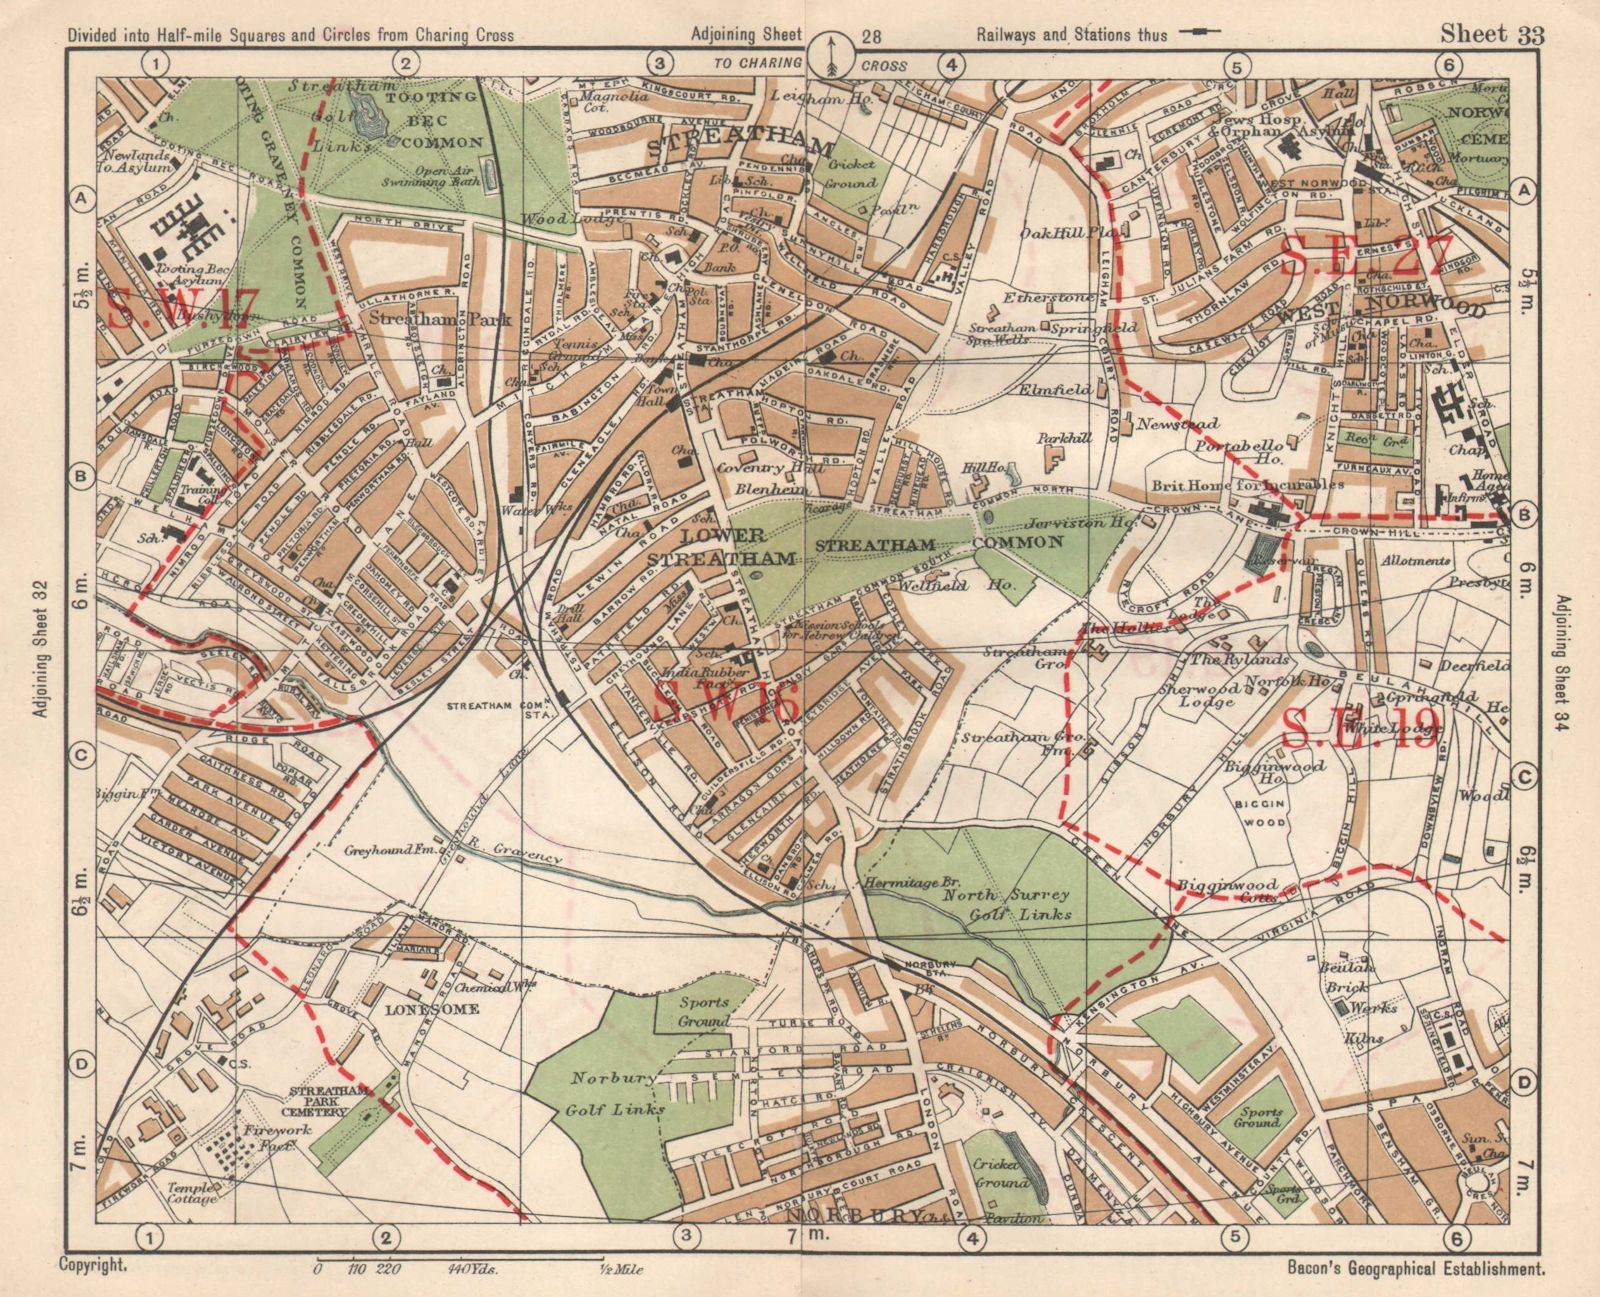 S LONDON. Streatham/Vale Norbury Tooting Bec West Norwood. BACON 1925 old map